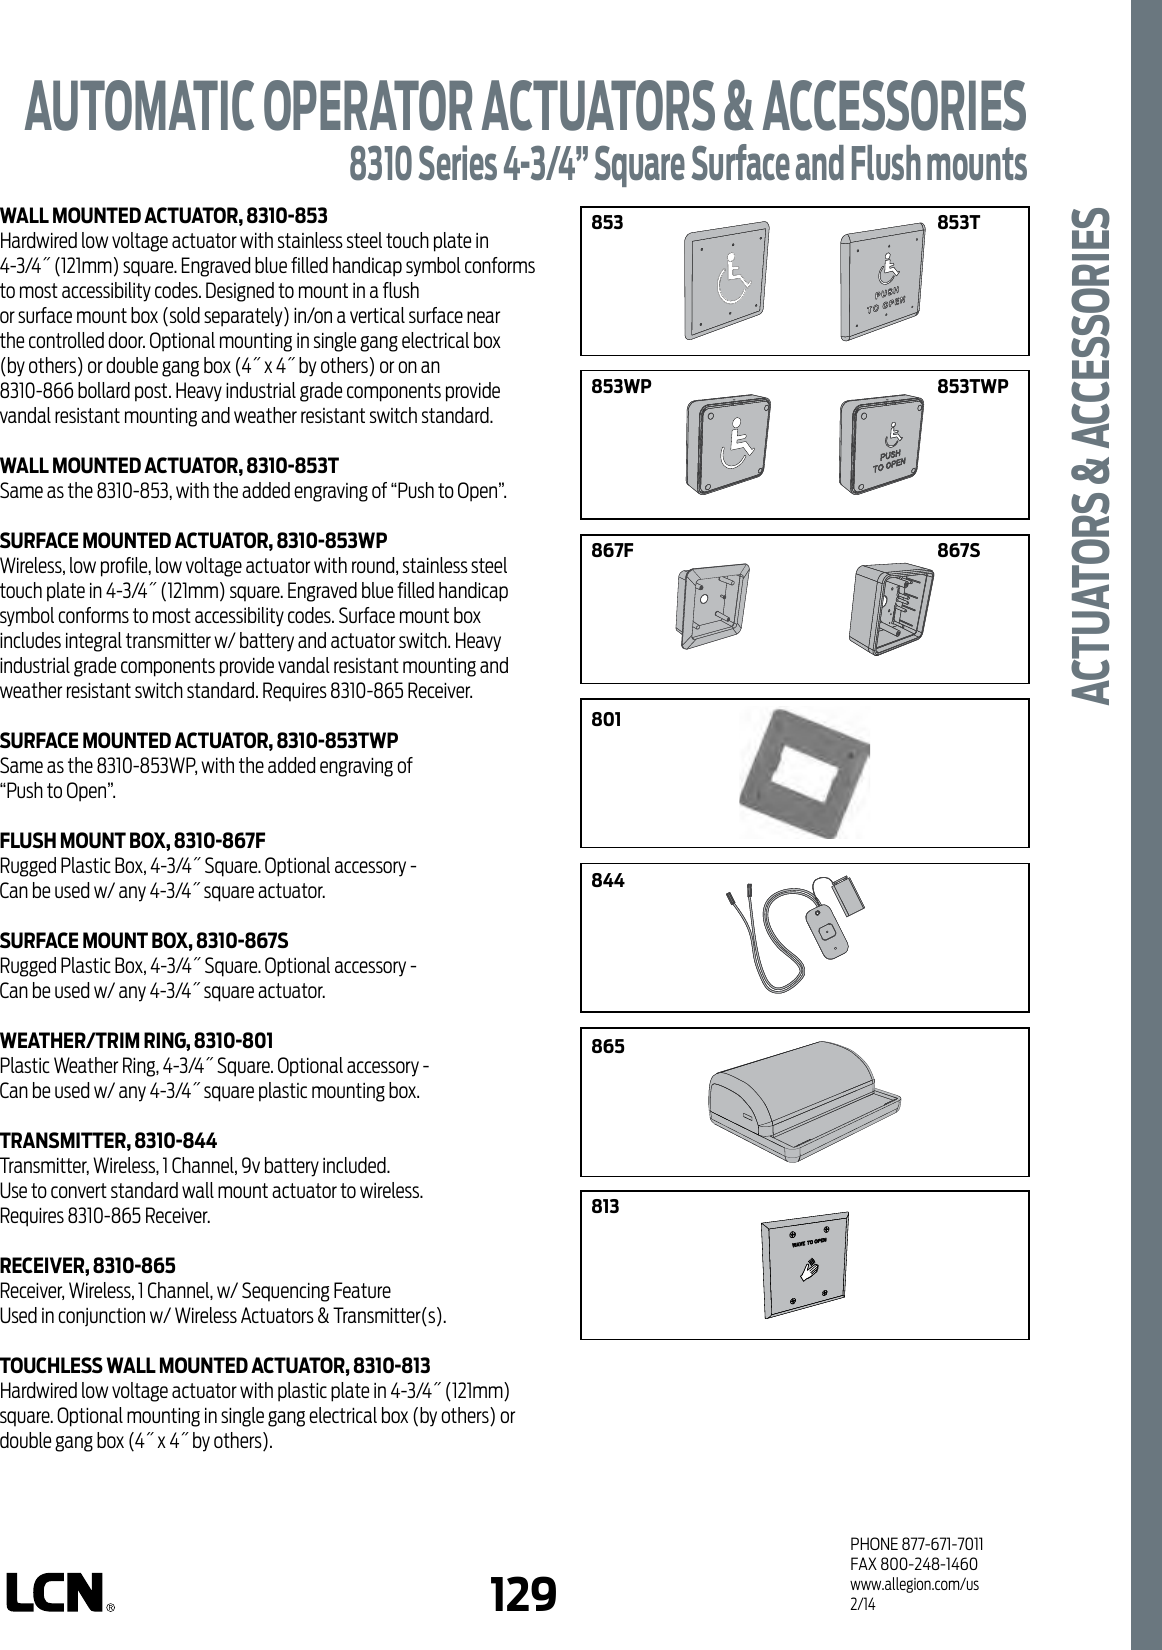 Page 7 of 9 - LCN  8310 Series Automatic Operator Actuators & Accessories Cut Sheet